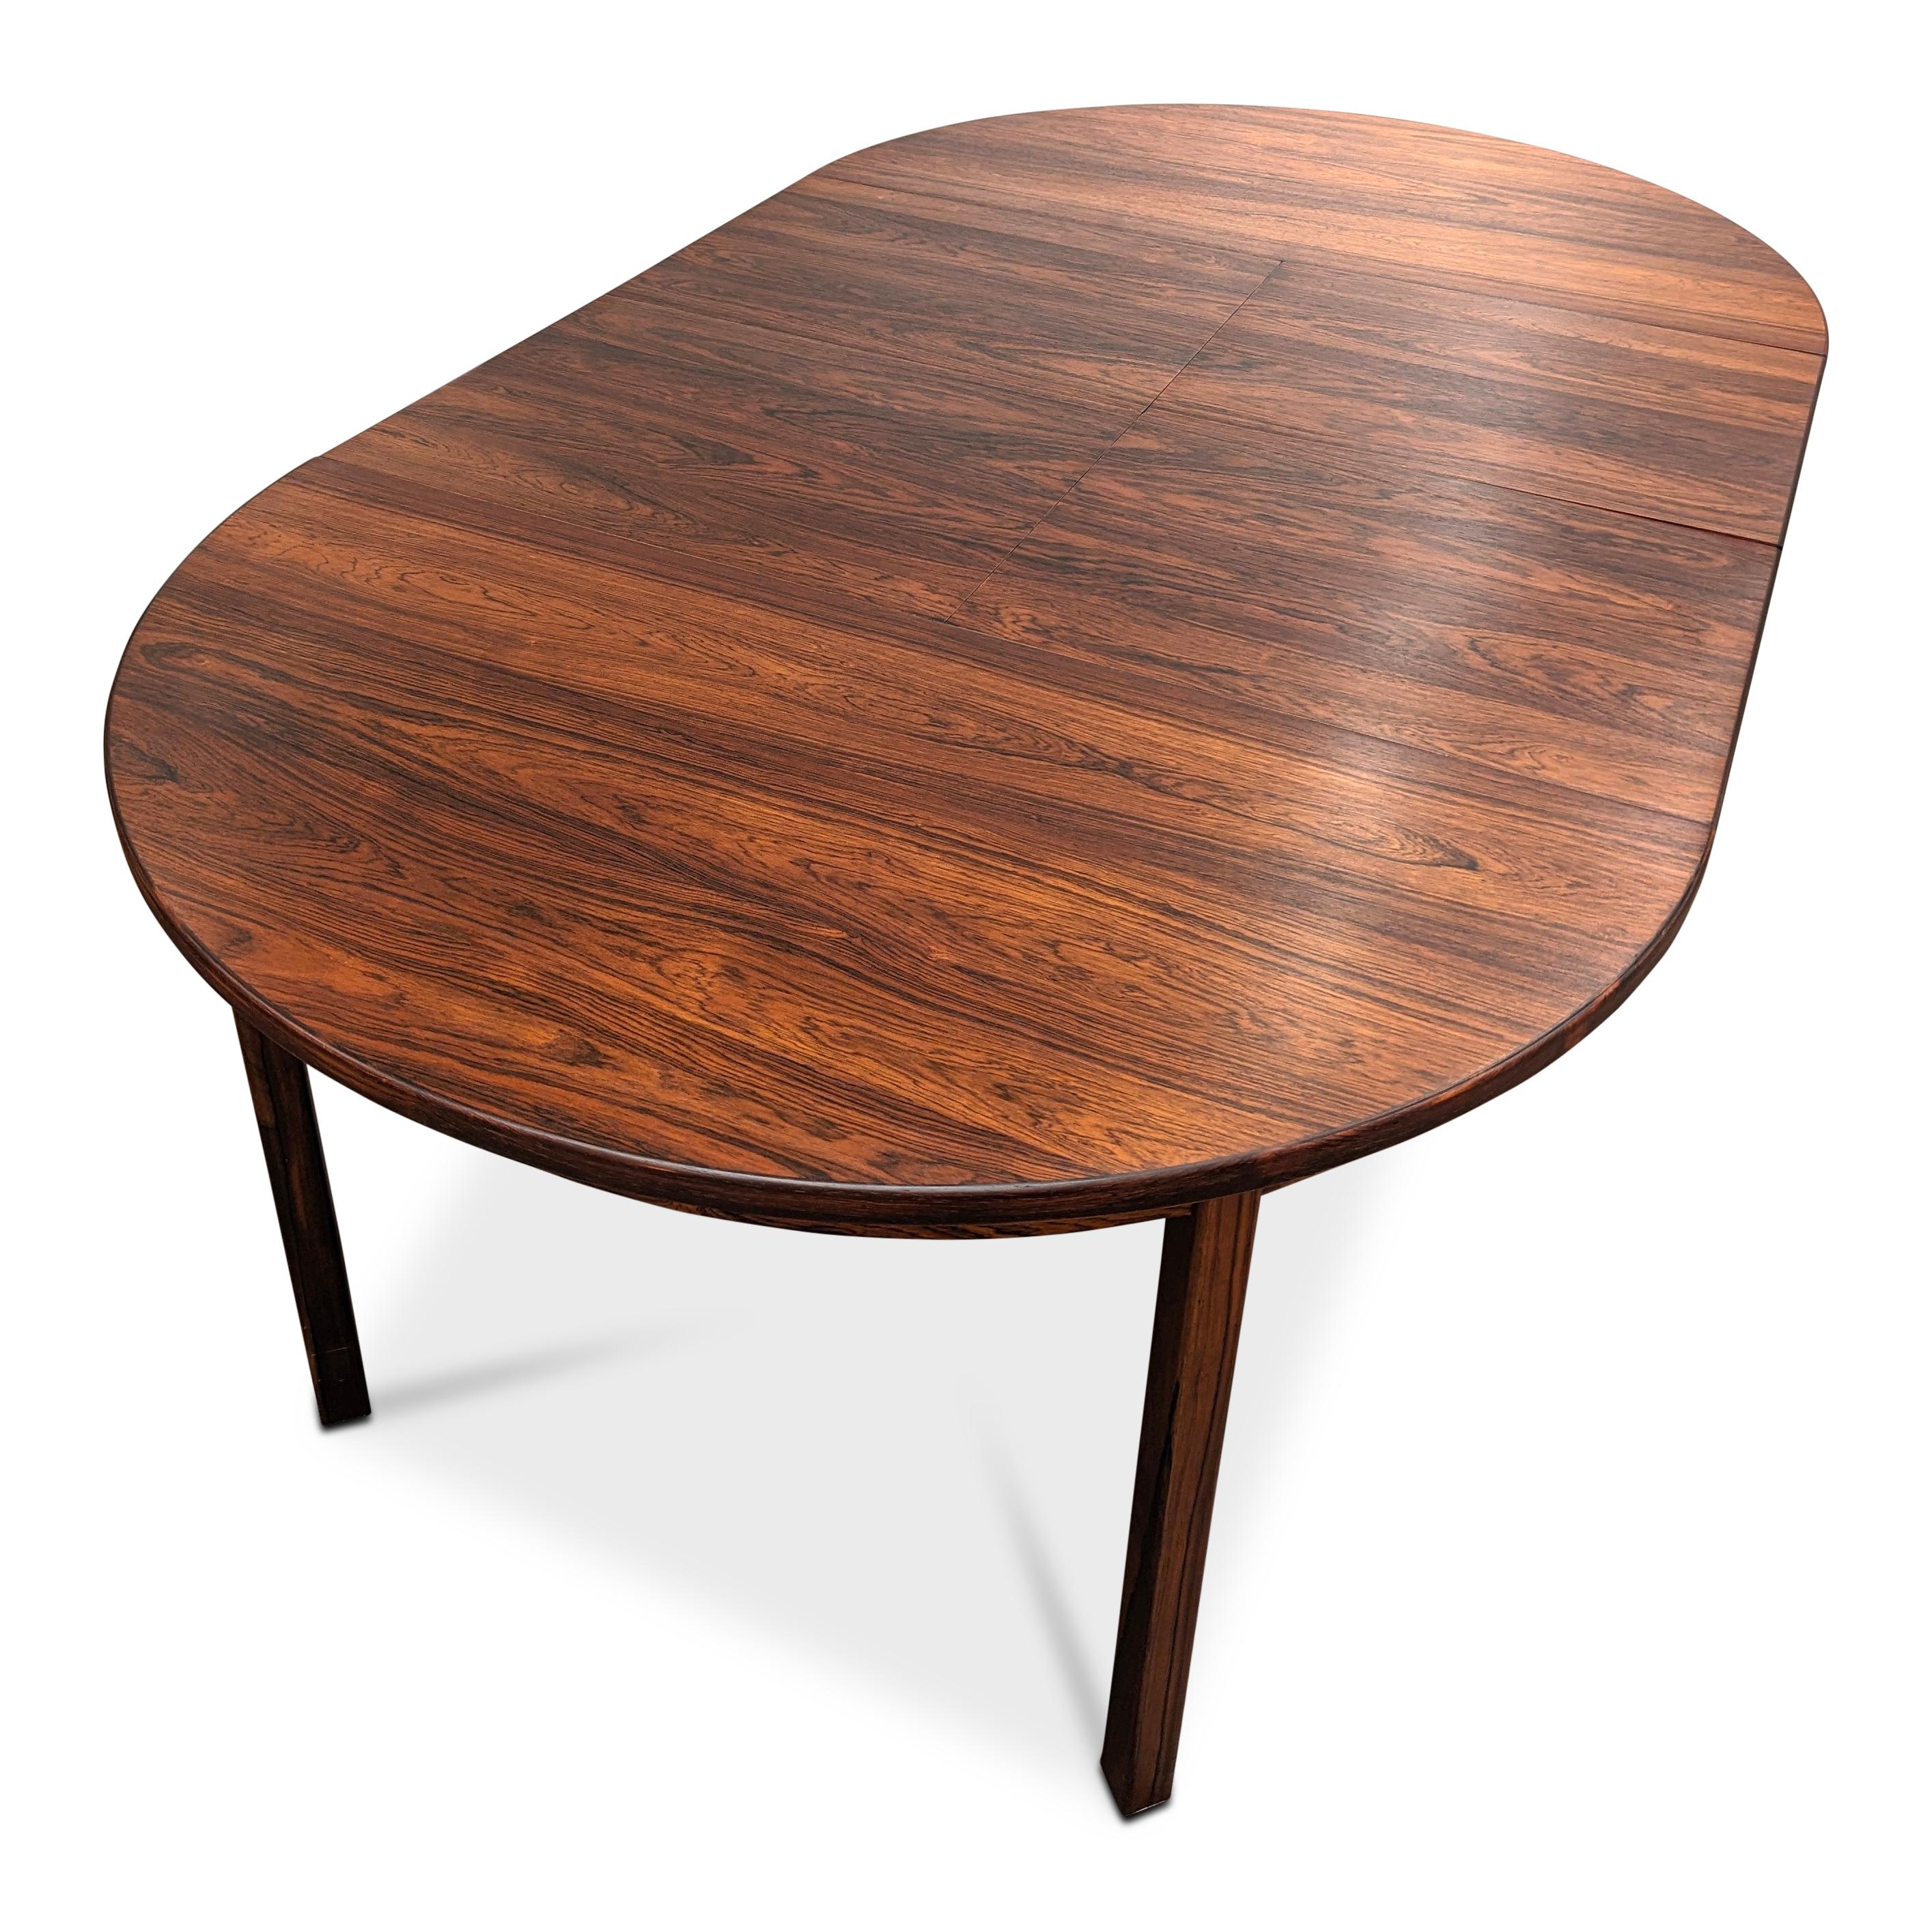 Round Rosewood Table w 2 Butterfly Leaves - 022435 Vintage Danish Modern 6